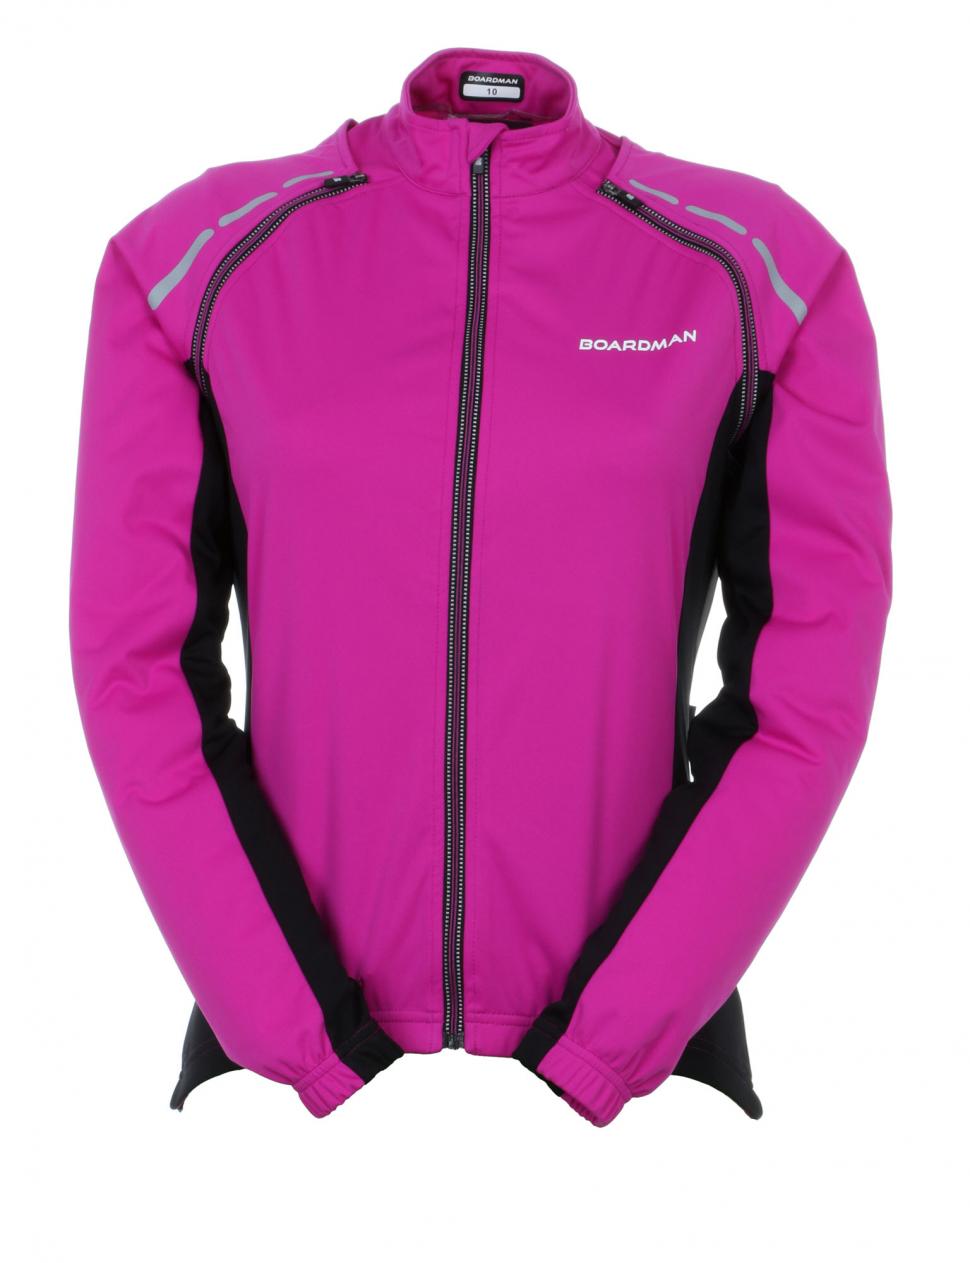 Boardman expands clothing range with focus on affordability | road.cc